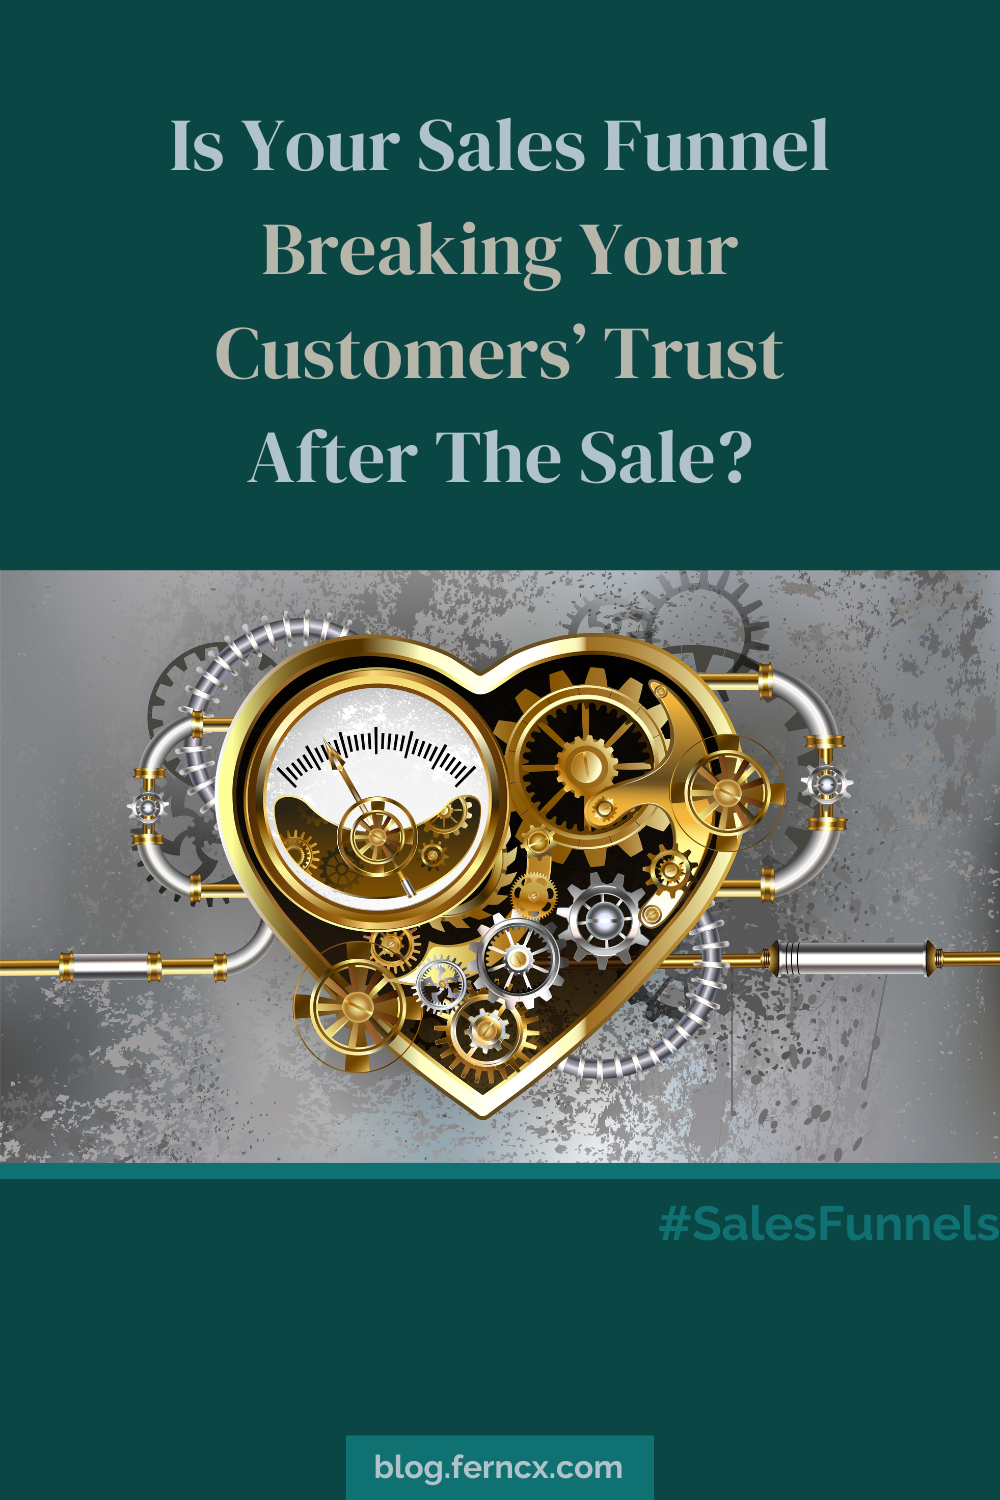 Silver text on green background that says, "Is your sales funnel breaking your customers' trust after the sale?" and an illustration of a mechanical heart with gears and pipes representing sales funnels designed for ethical businesses.